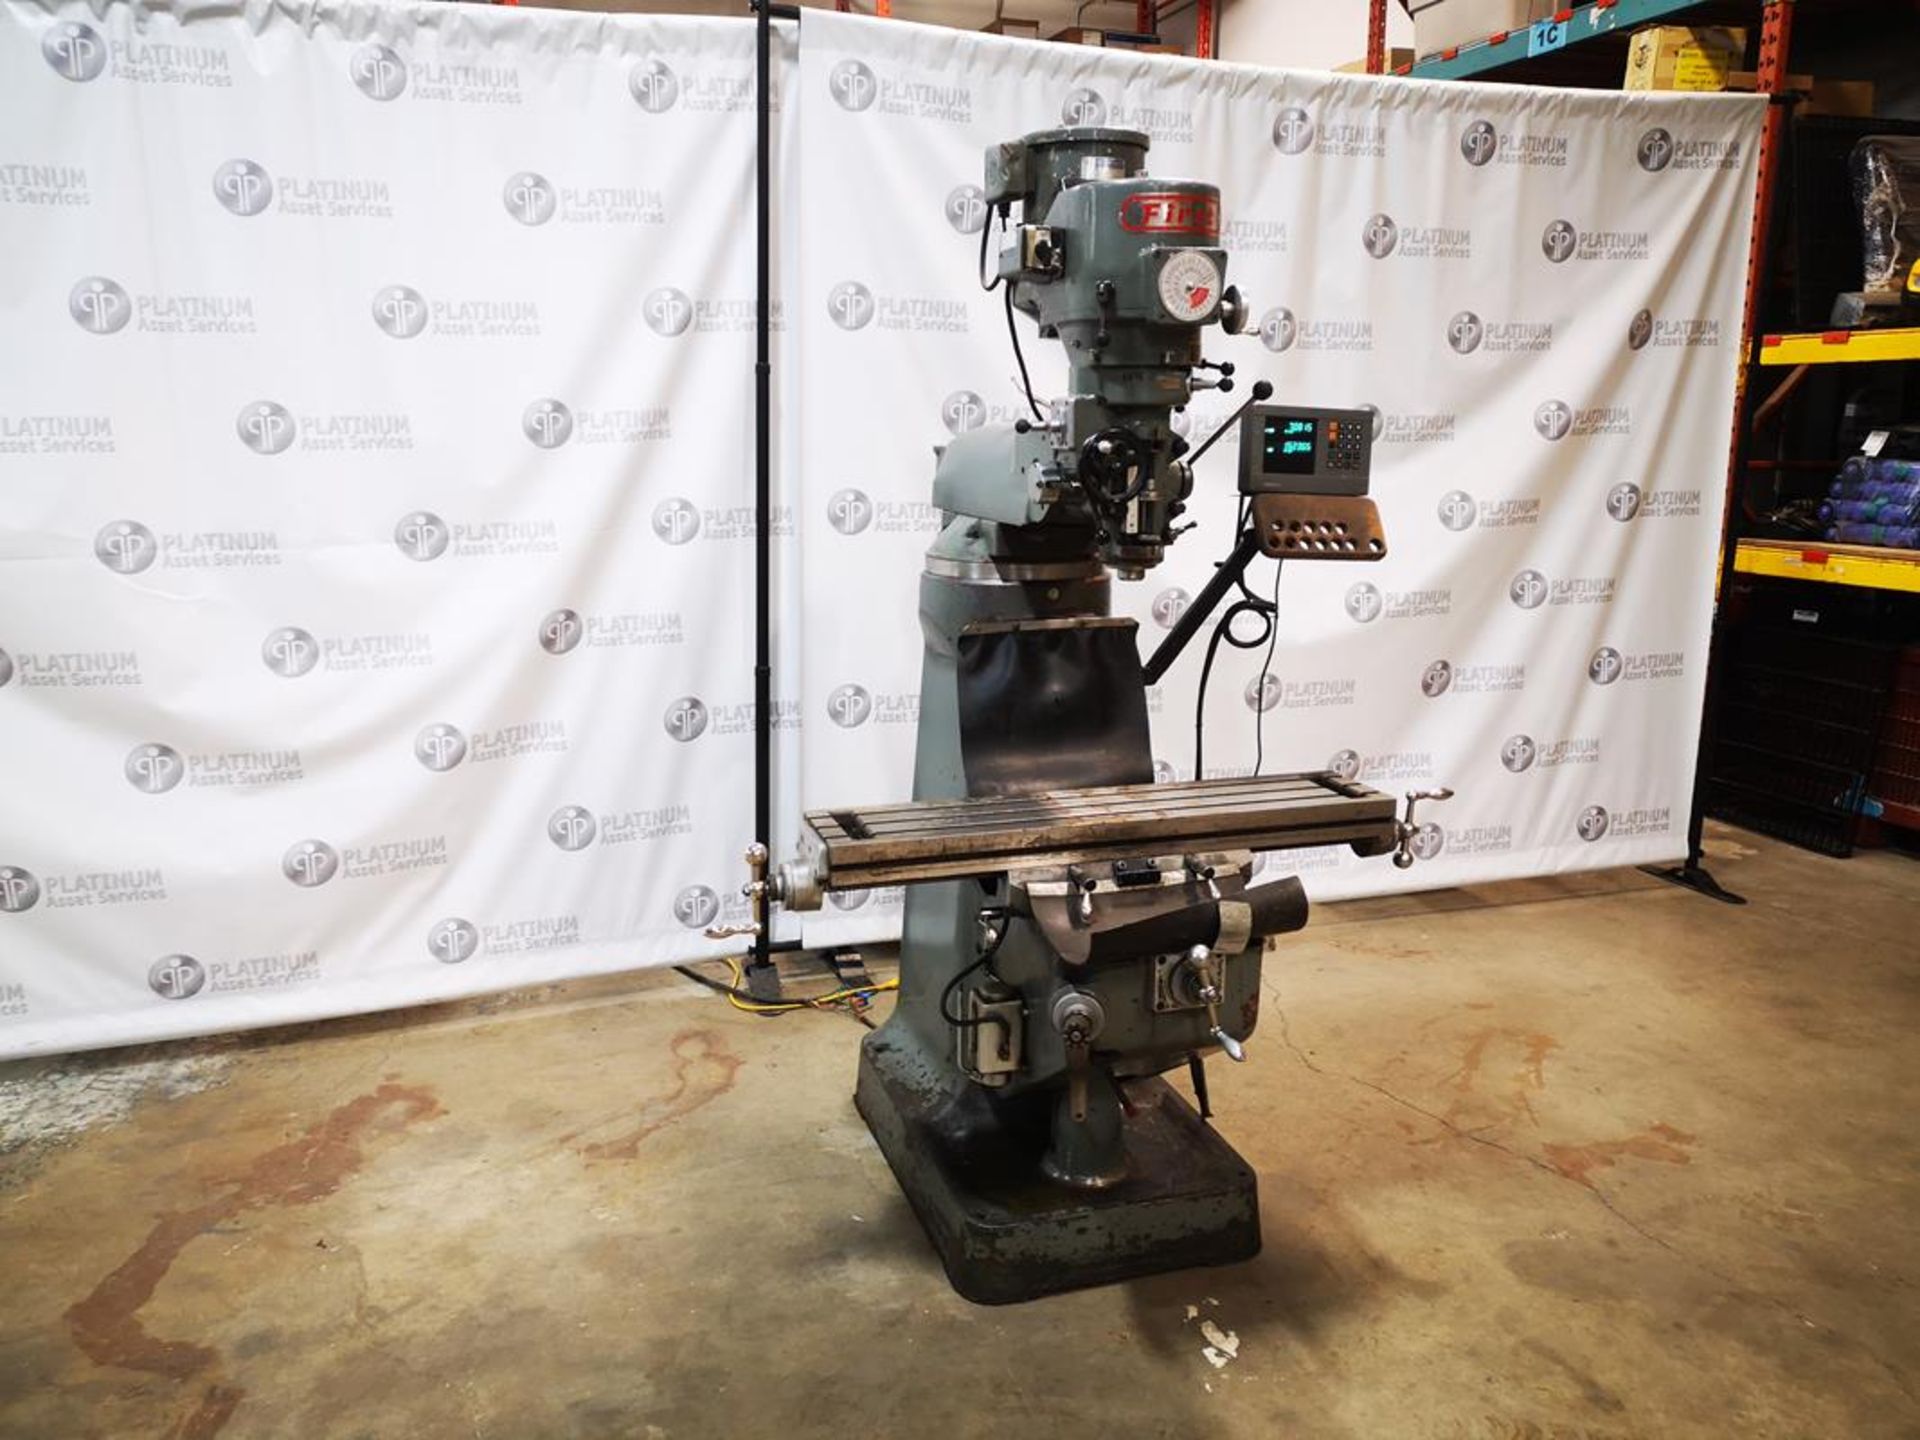 FIRST, LC 1 1/2, 9" X49", TURRET MILL, R8 SPINDLE 3 HP VARIABLE SPEED HEAD HEIDENHAIN ND 710 2